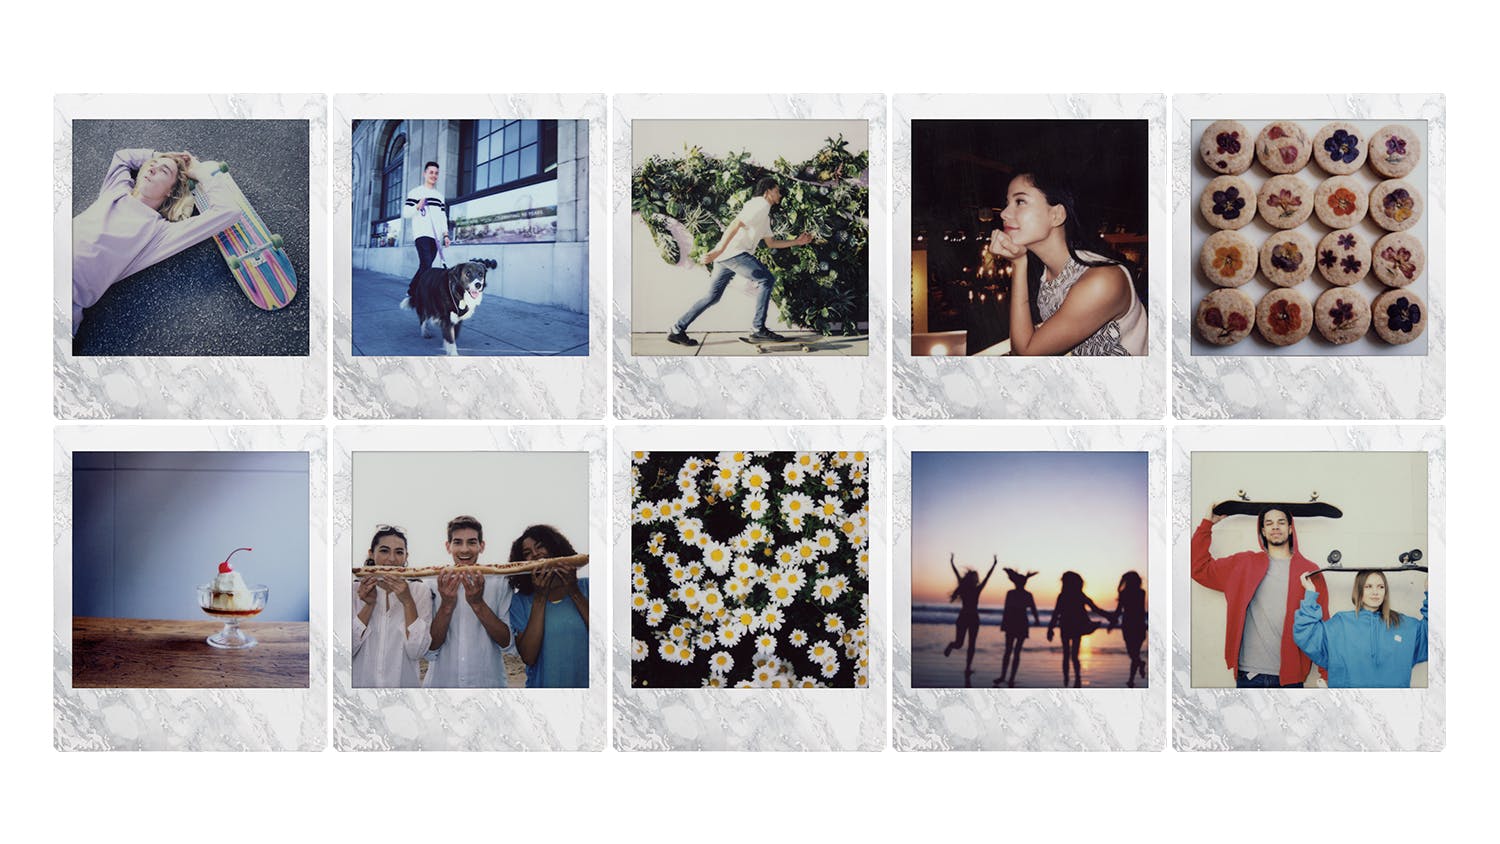 Instax Square Film 10 Pack - White Marble